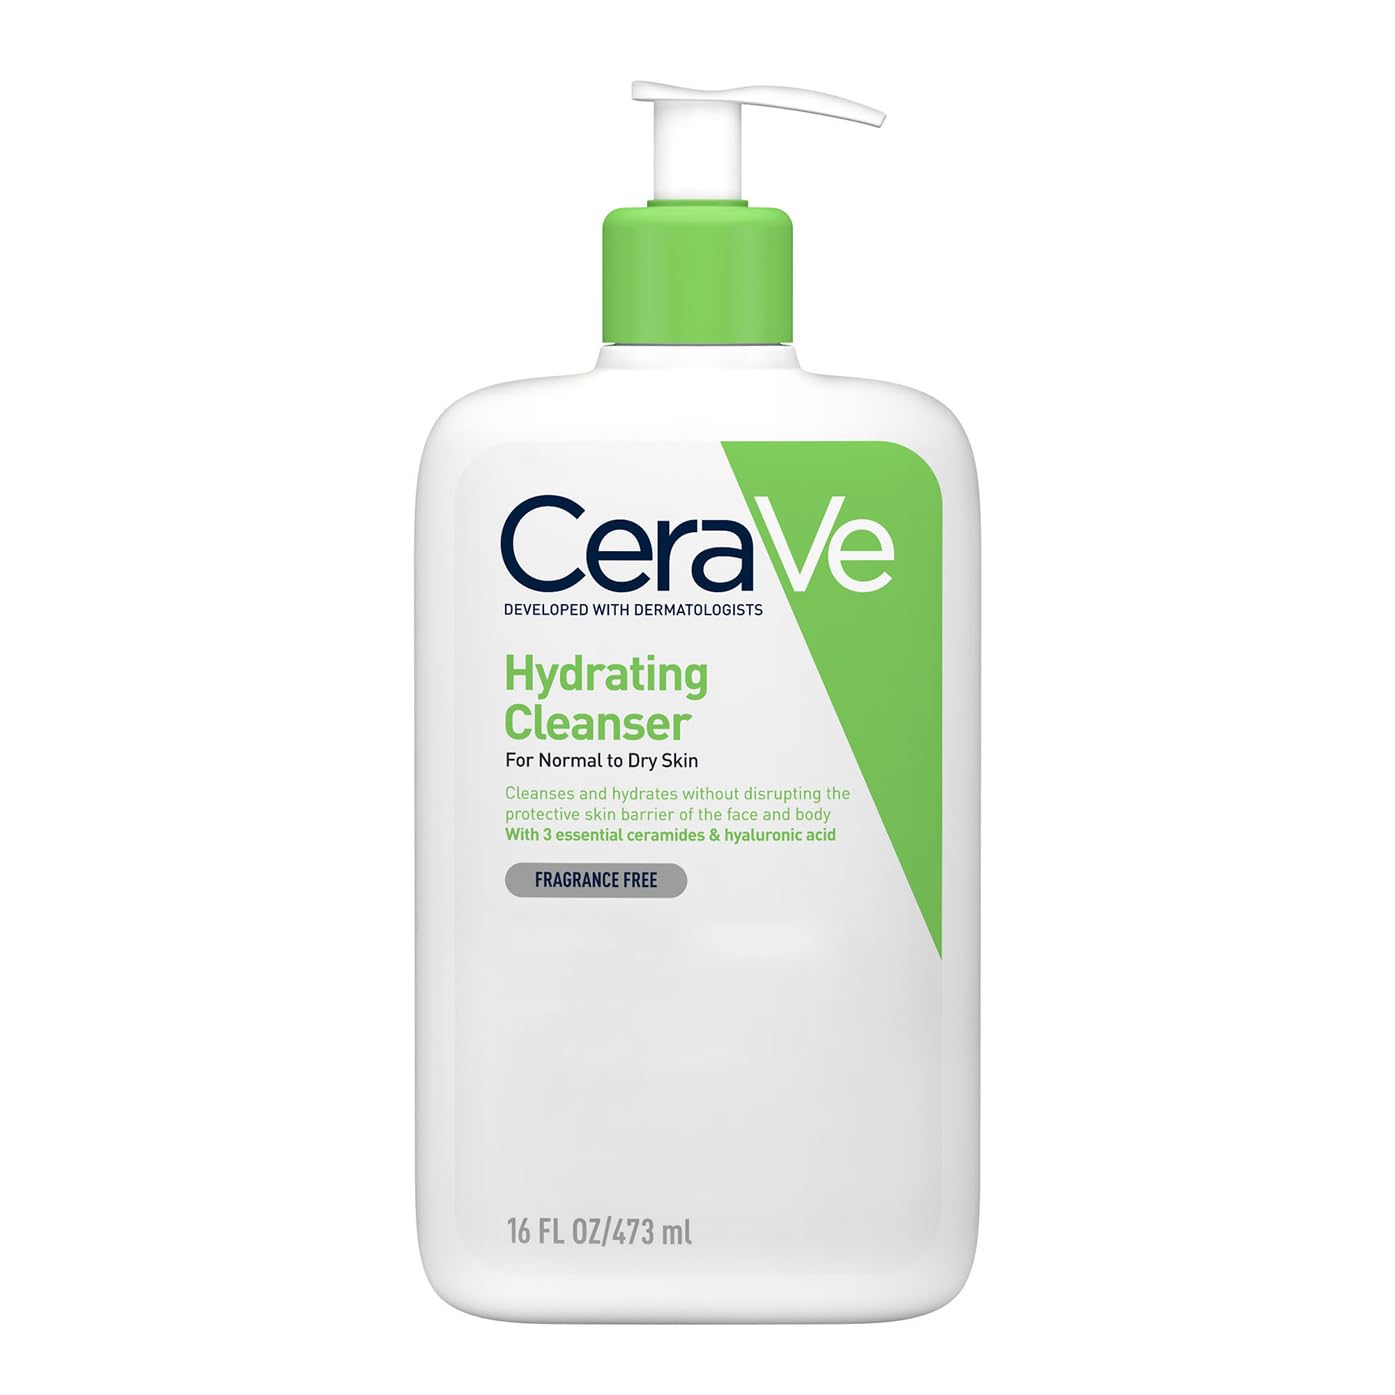 CeraVe Hydrating Cleanser for Normal to Dry Skin 473ml with Hyaluronic Acid & 3 Essential Ceramides - Ammpoure Wellbeing